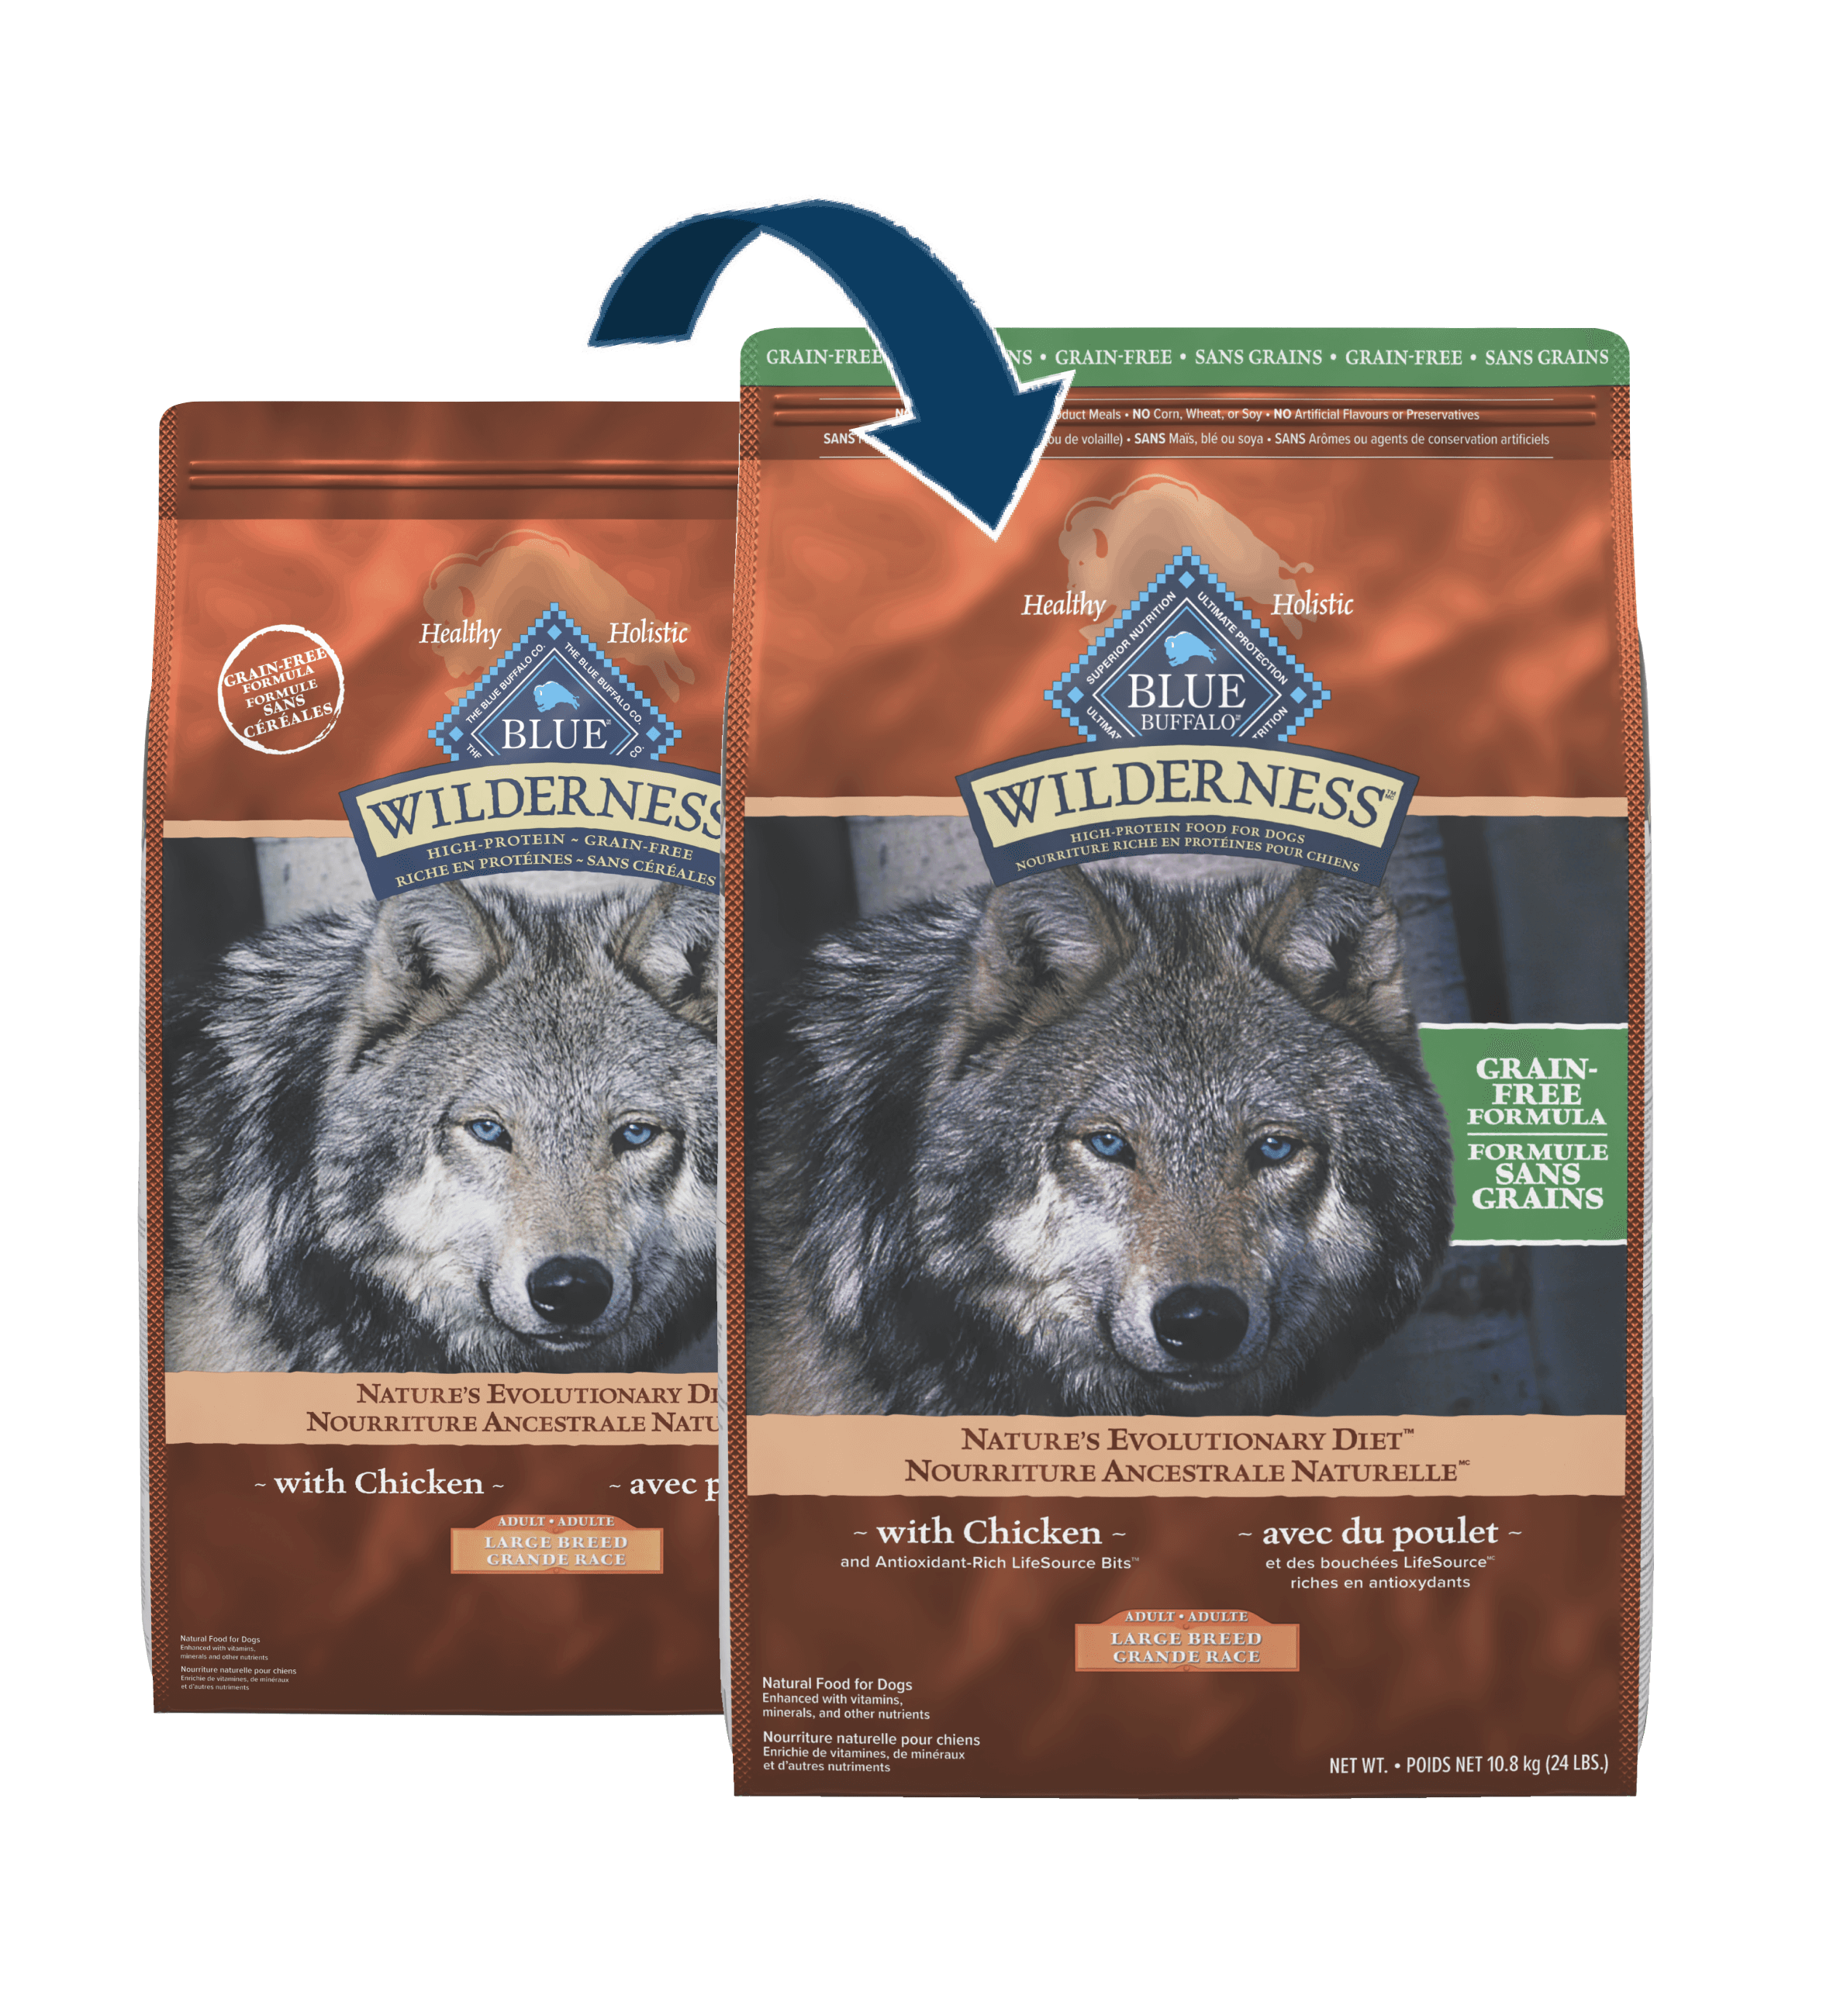 Displaying Two bags of Blue Buffalo Wilderness dog food with images of a gray wolf on the front, one for adult dogs and one for large breed dogs, highlighting grain-free ingredients and the packaging transition.